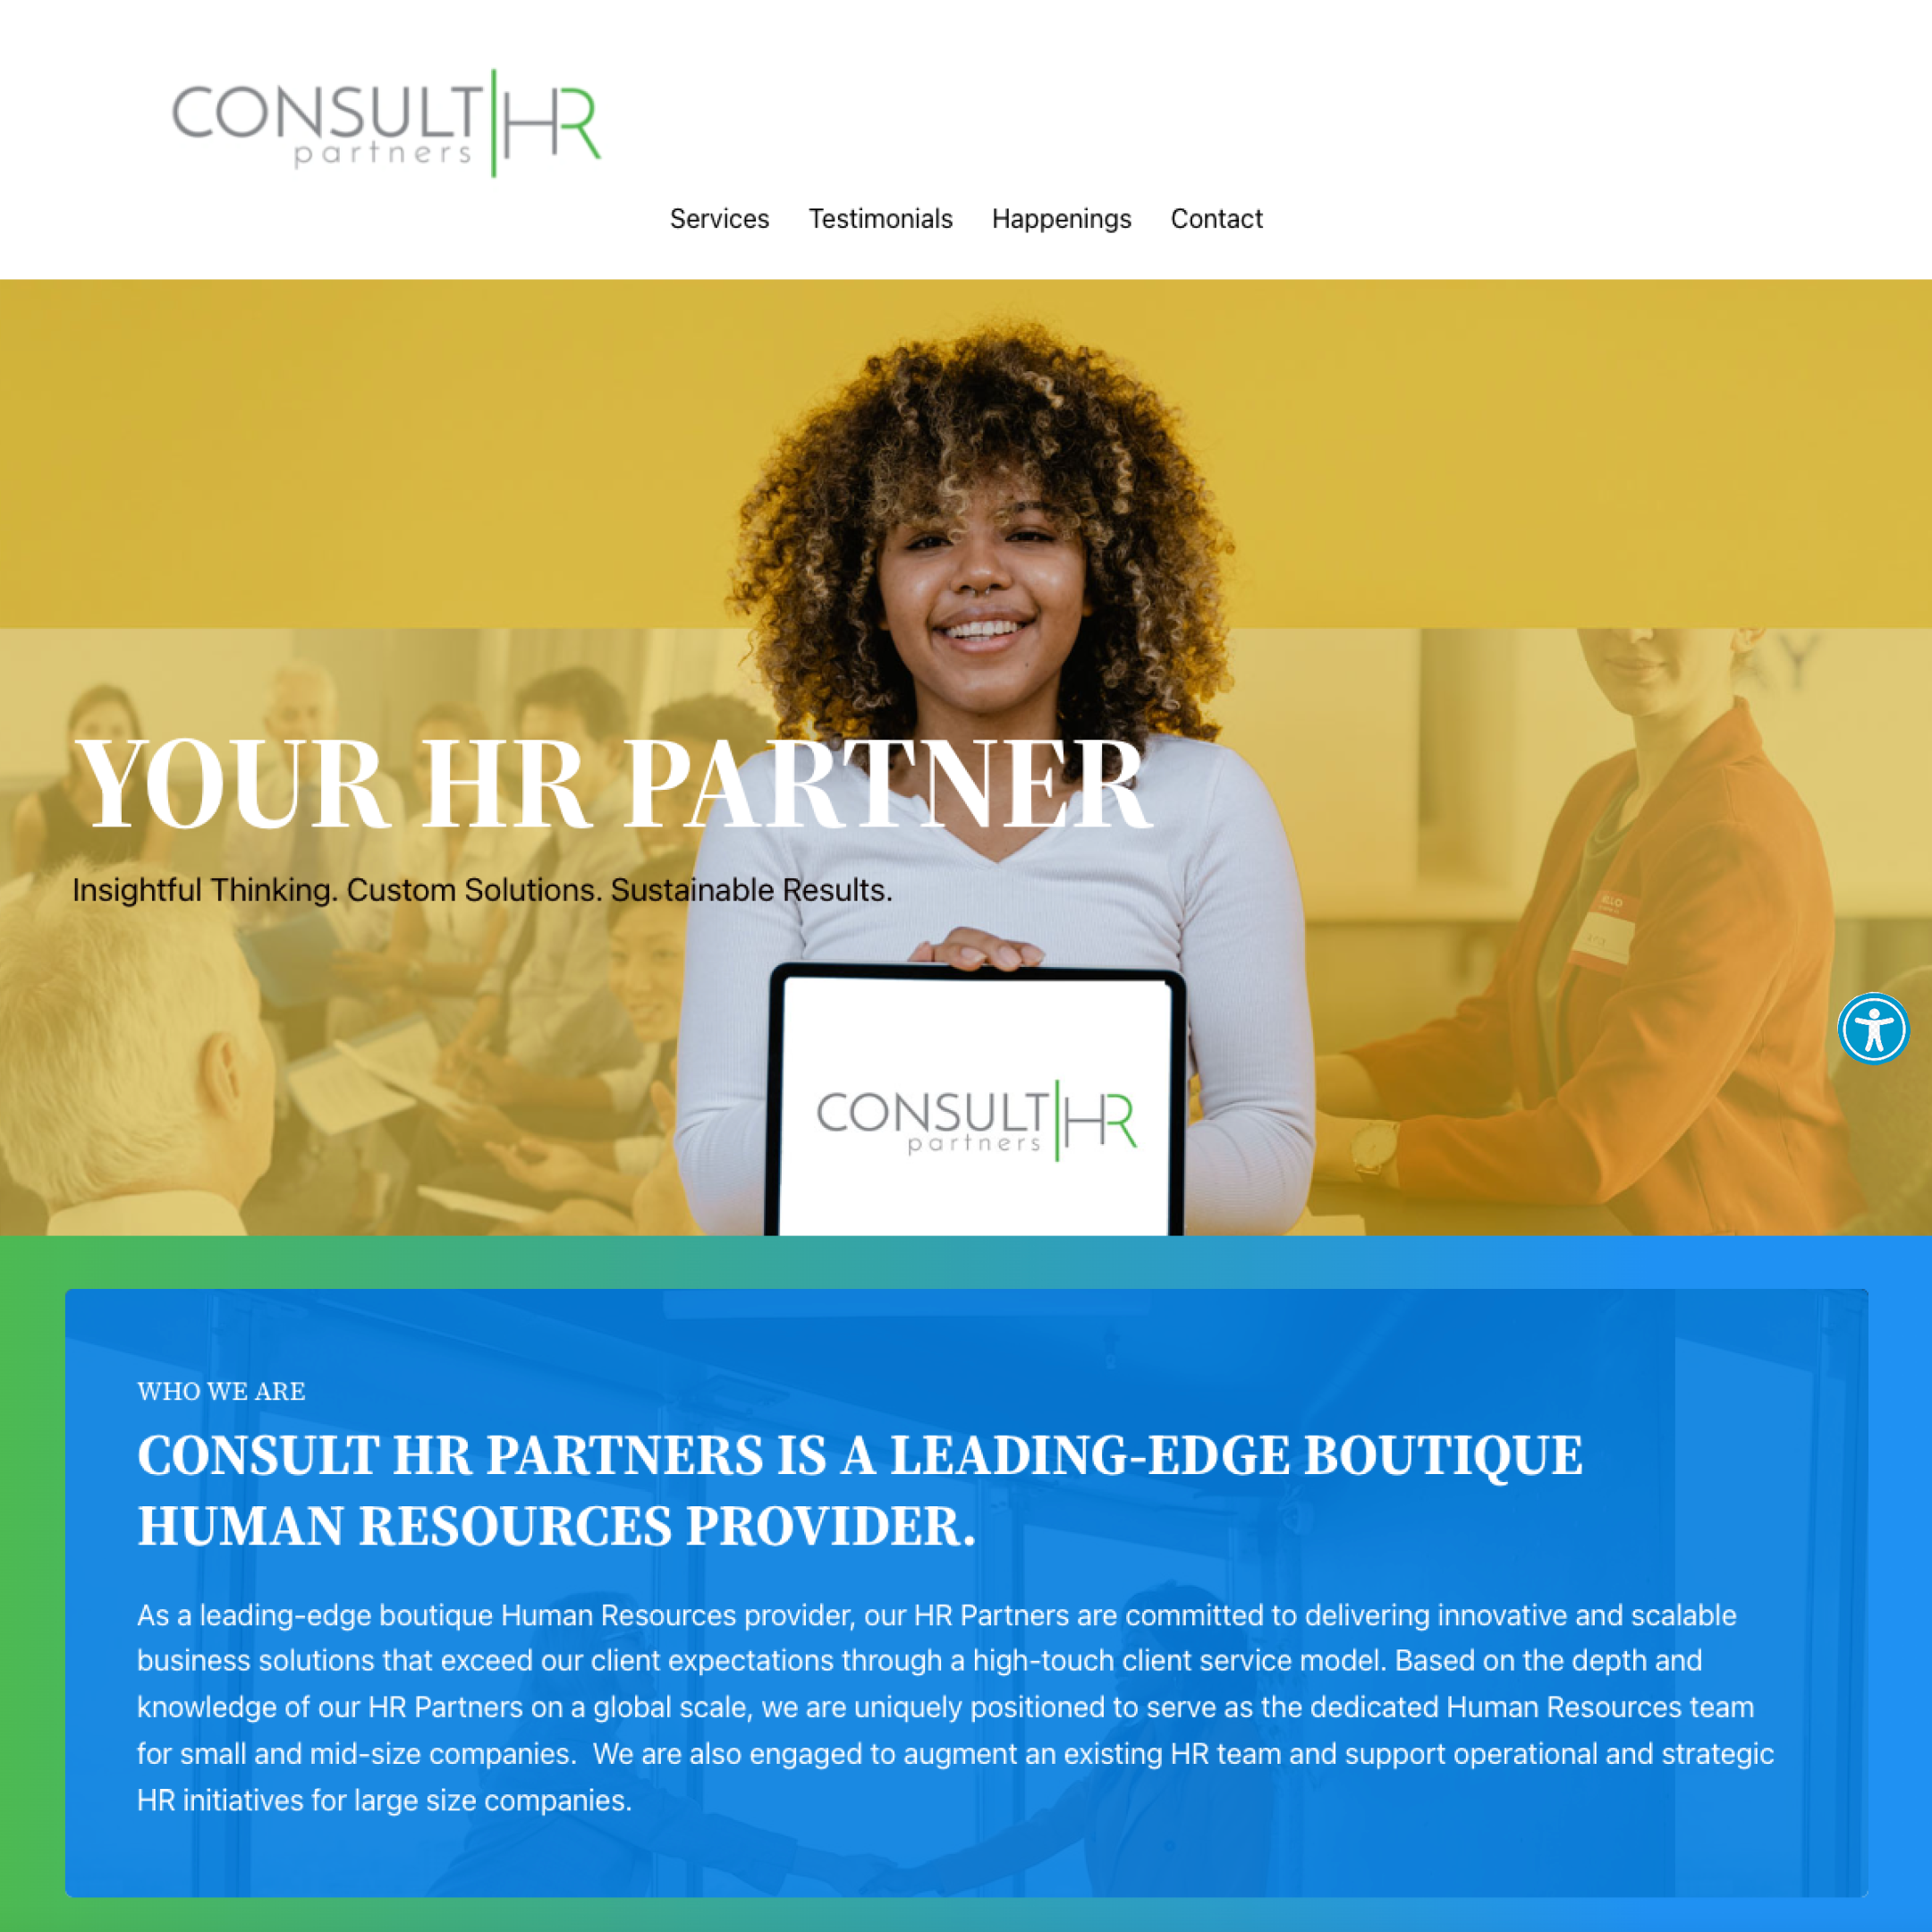 Consult HR Partners announces a new ‘solutions oriented’ website, designed with ADA accessibility features in mind